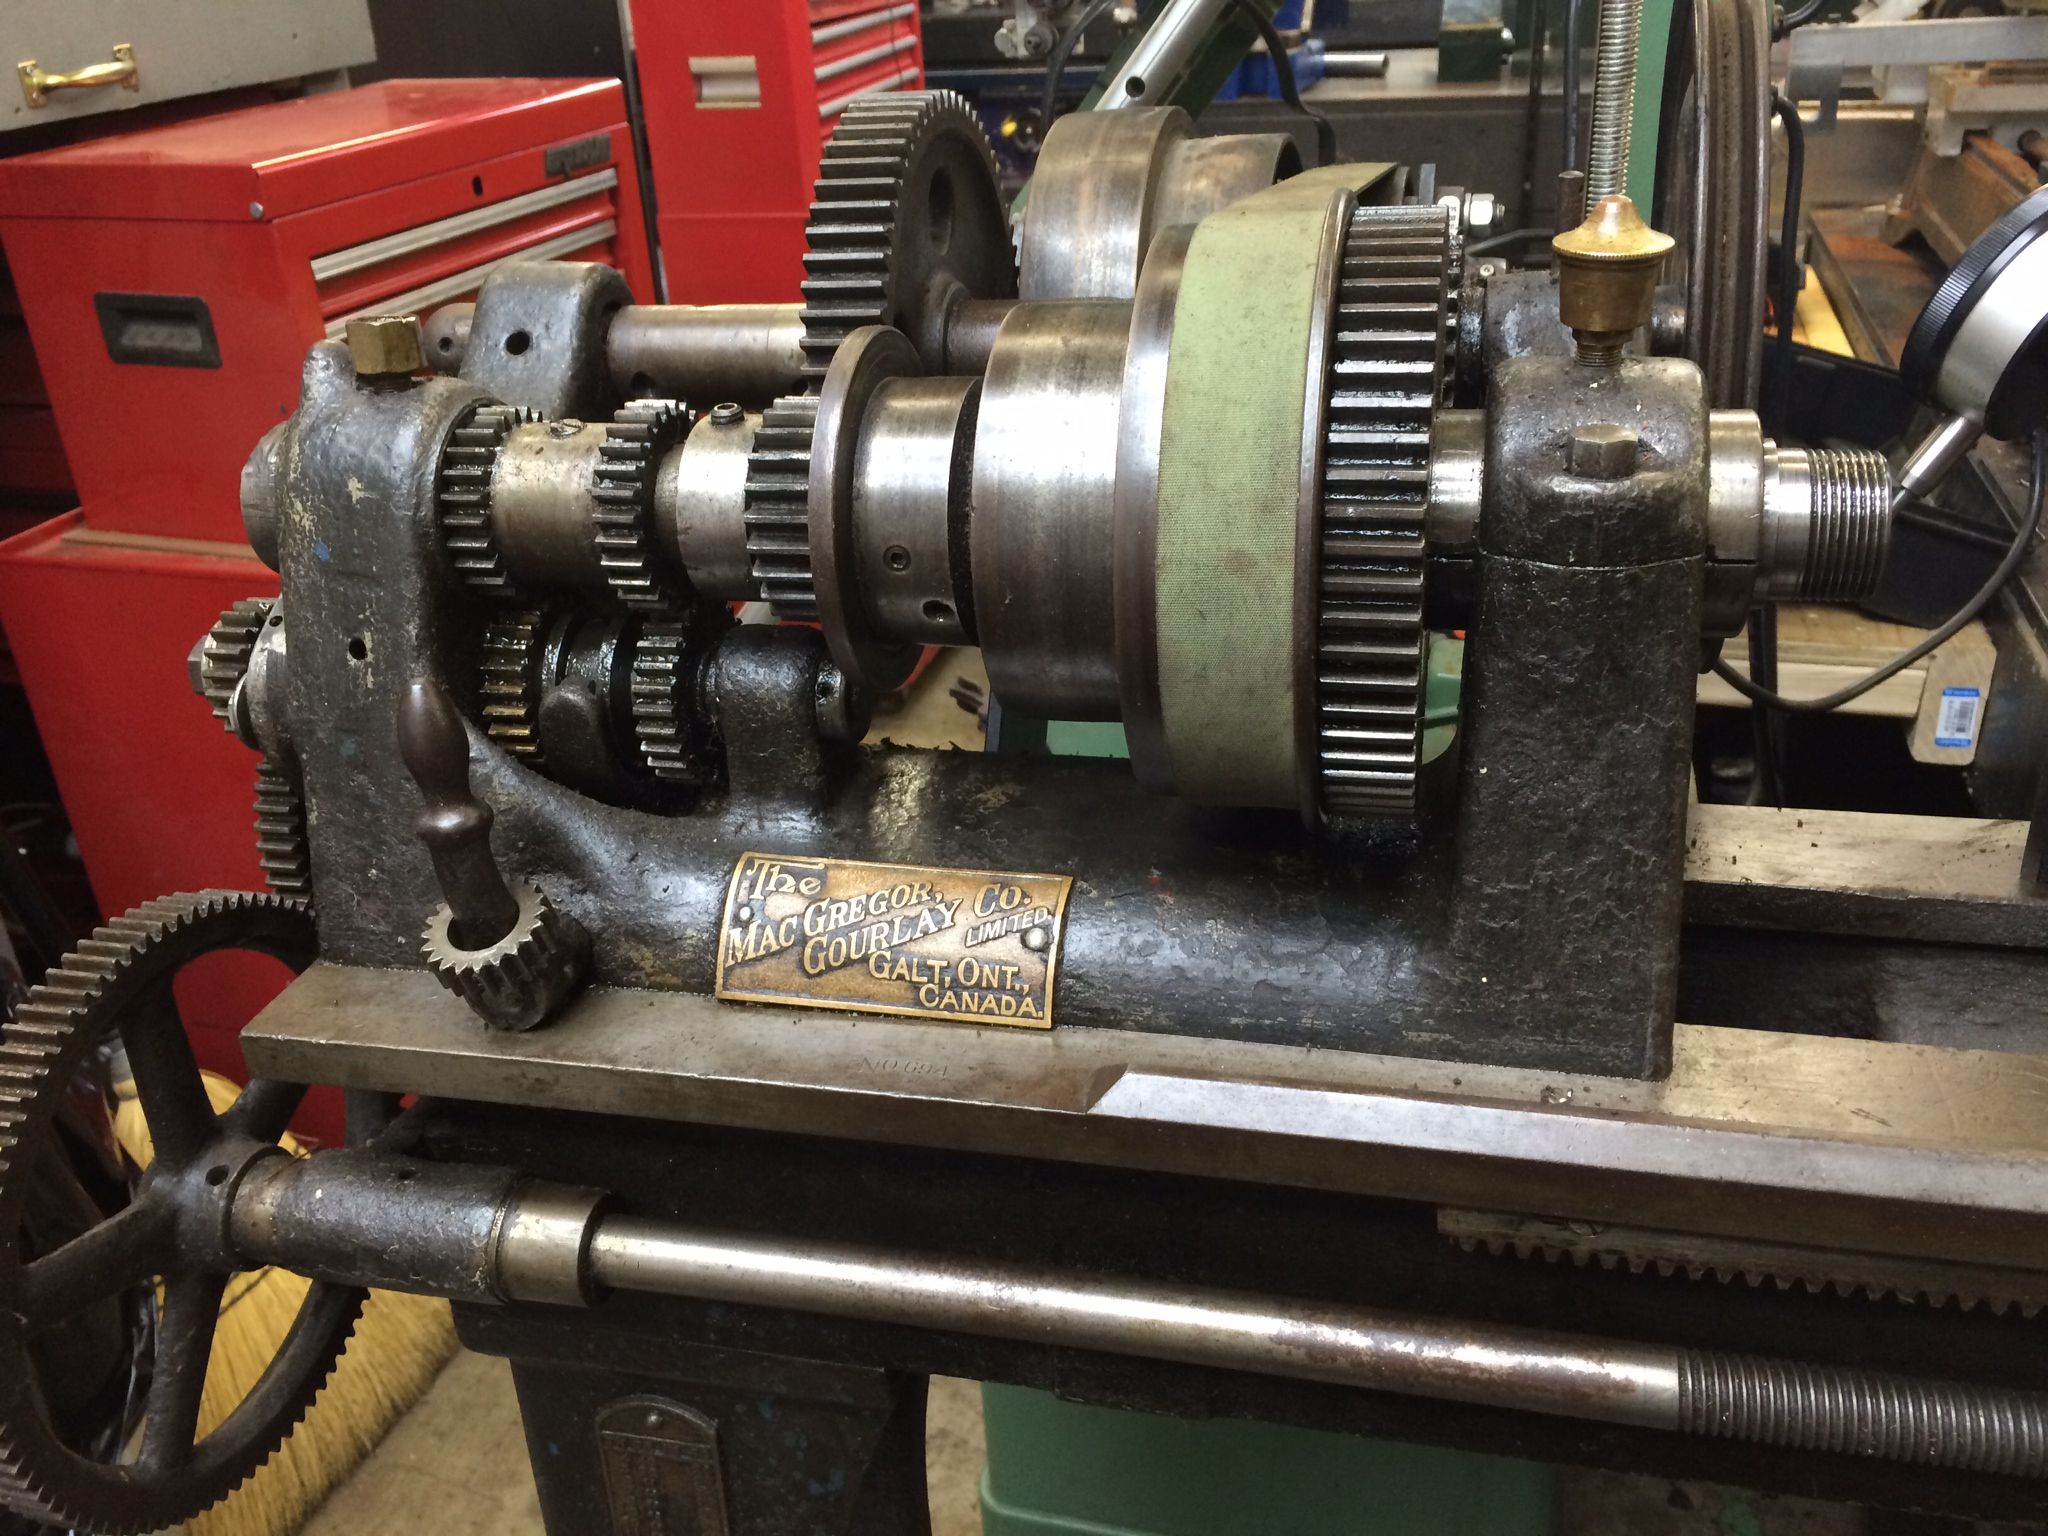 New Lathe...about 110 years old! http://www.practicalmachinist.com ...